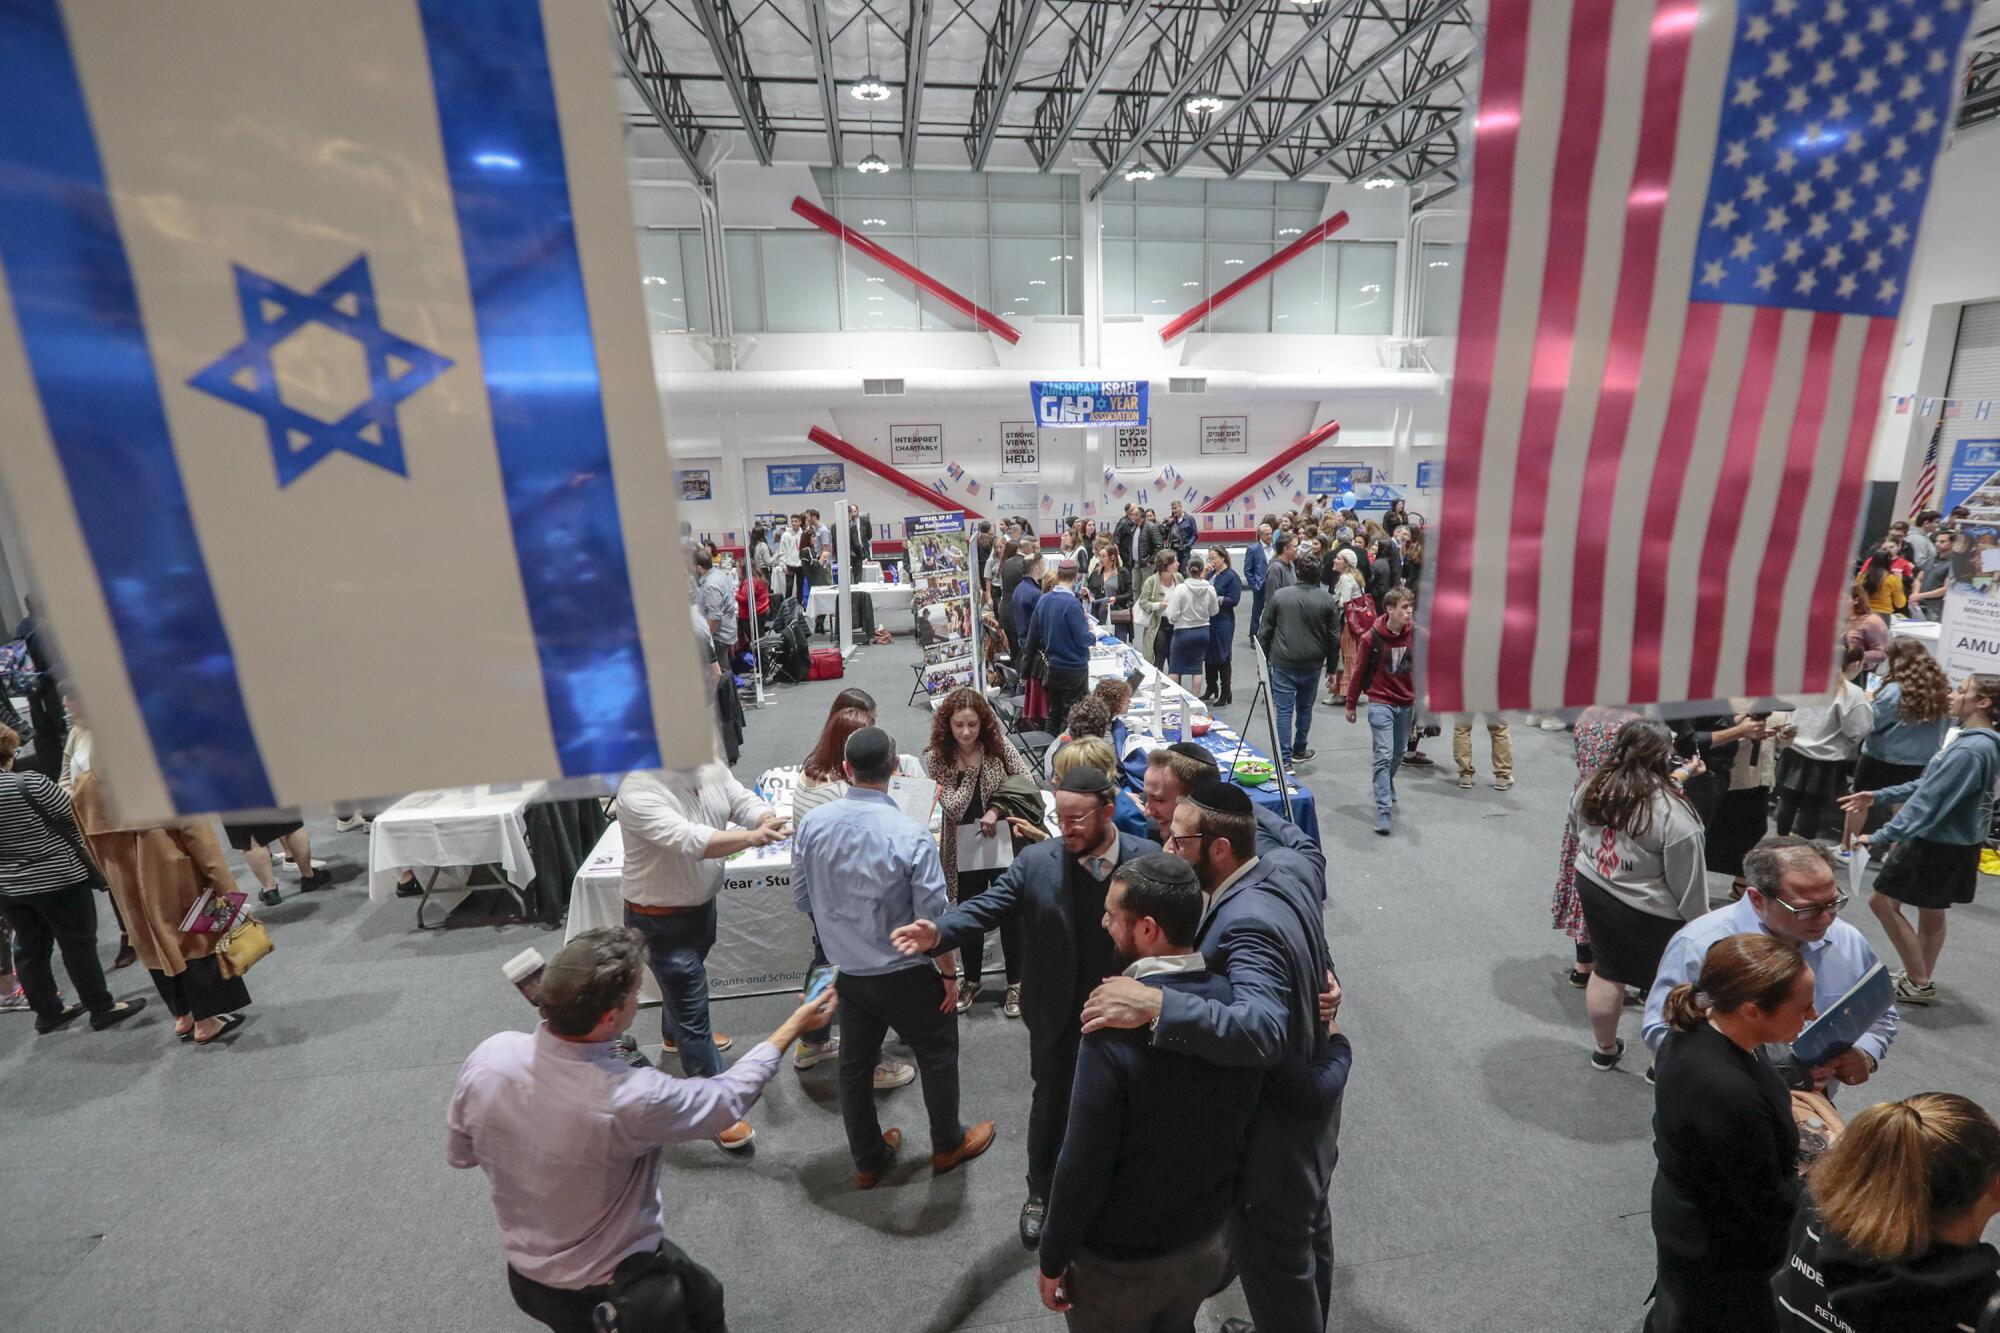 People fill a large room where large flags of Israel and the United States hang from the rafters.